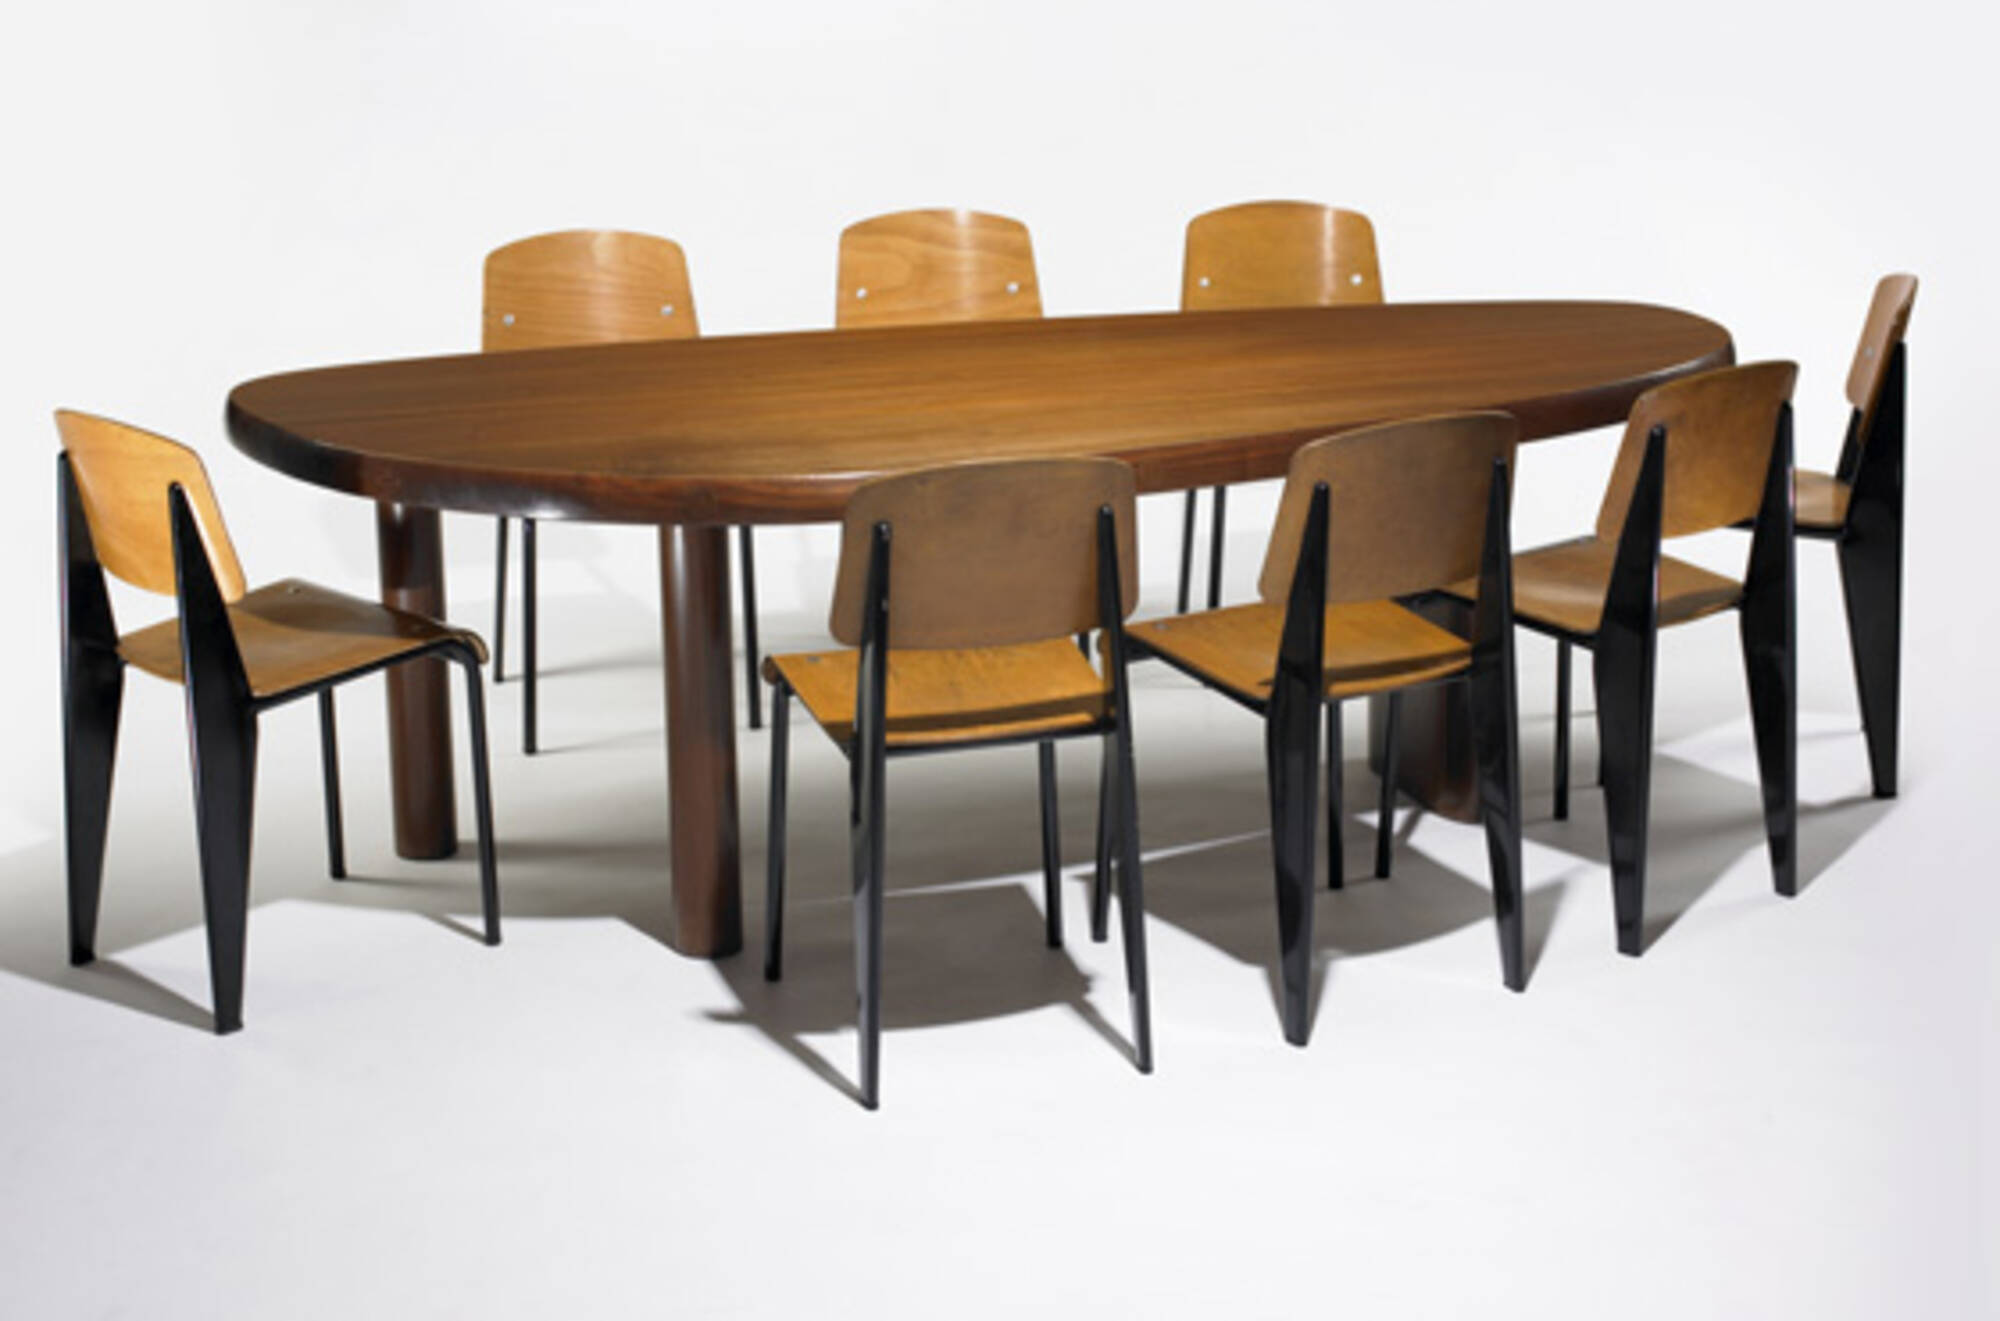 248: CHARLOTTE PERRIAND, Forme Libre dining table < Important